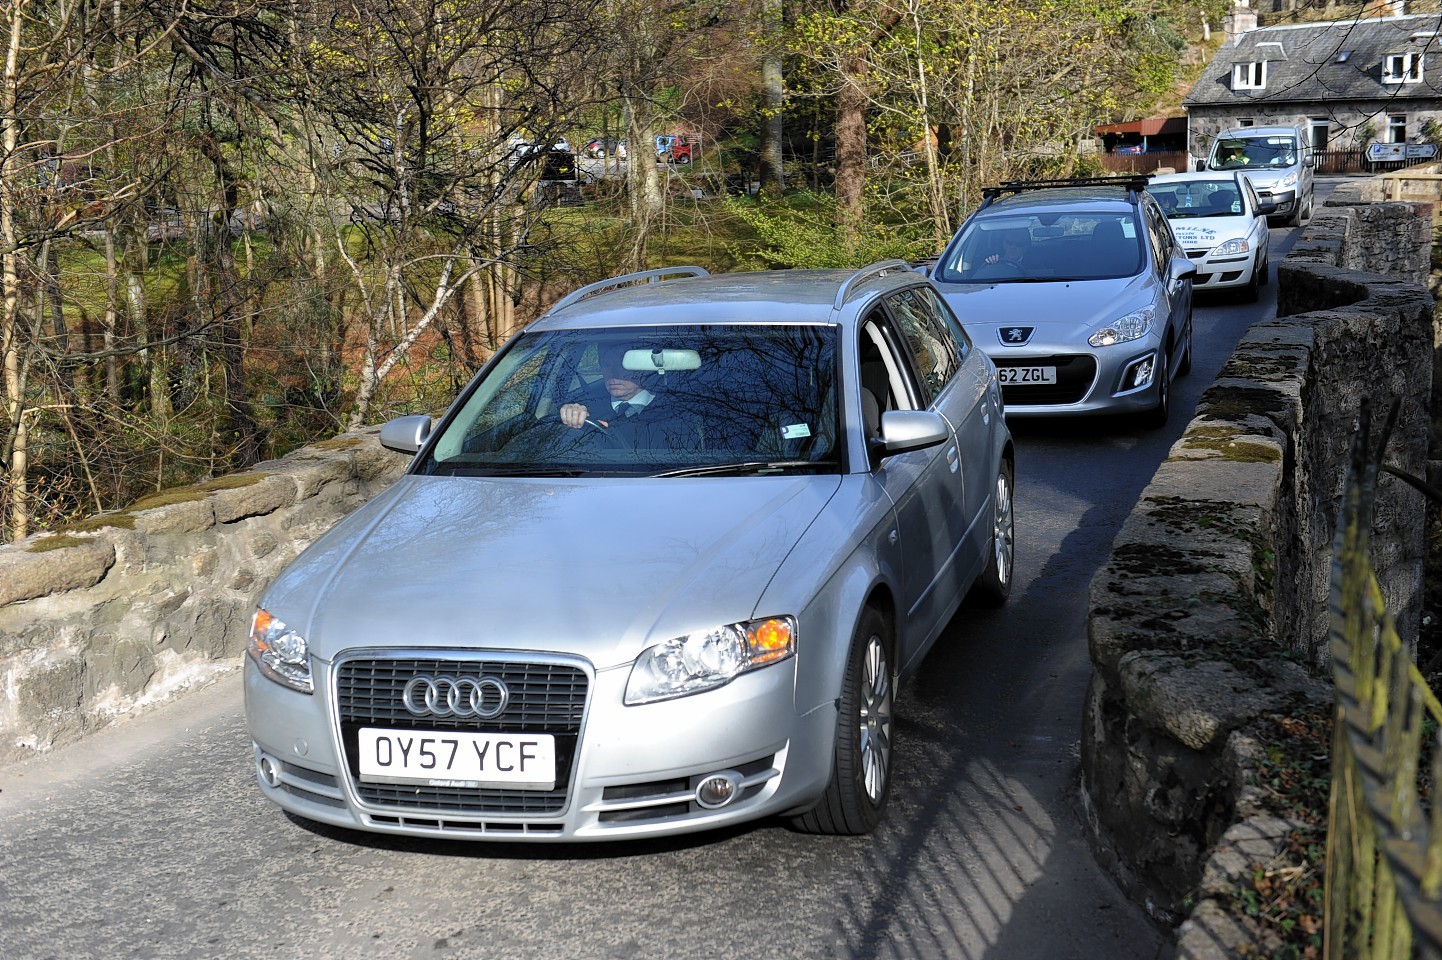 Locals are worried about traffic at the Bridge of Feugh